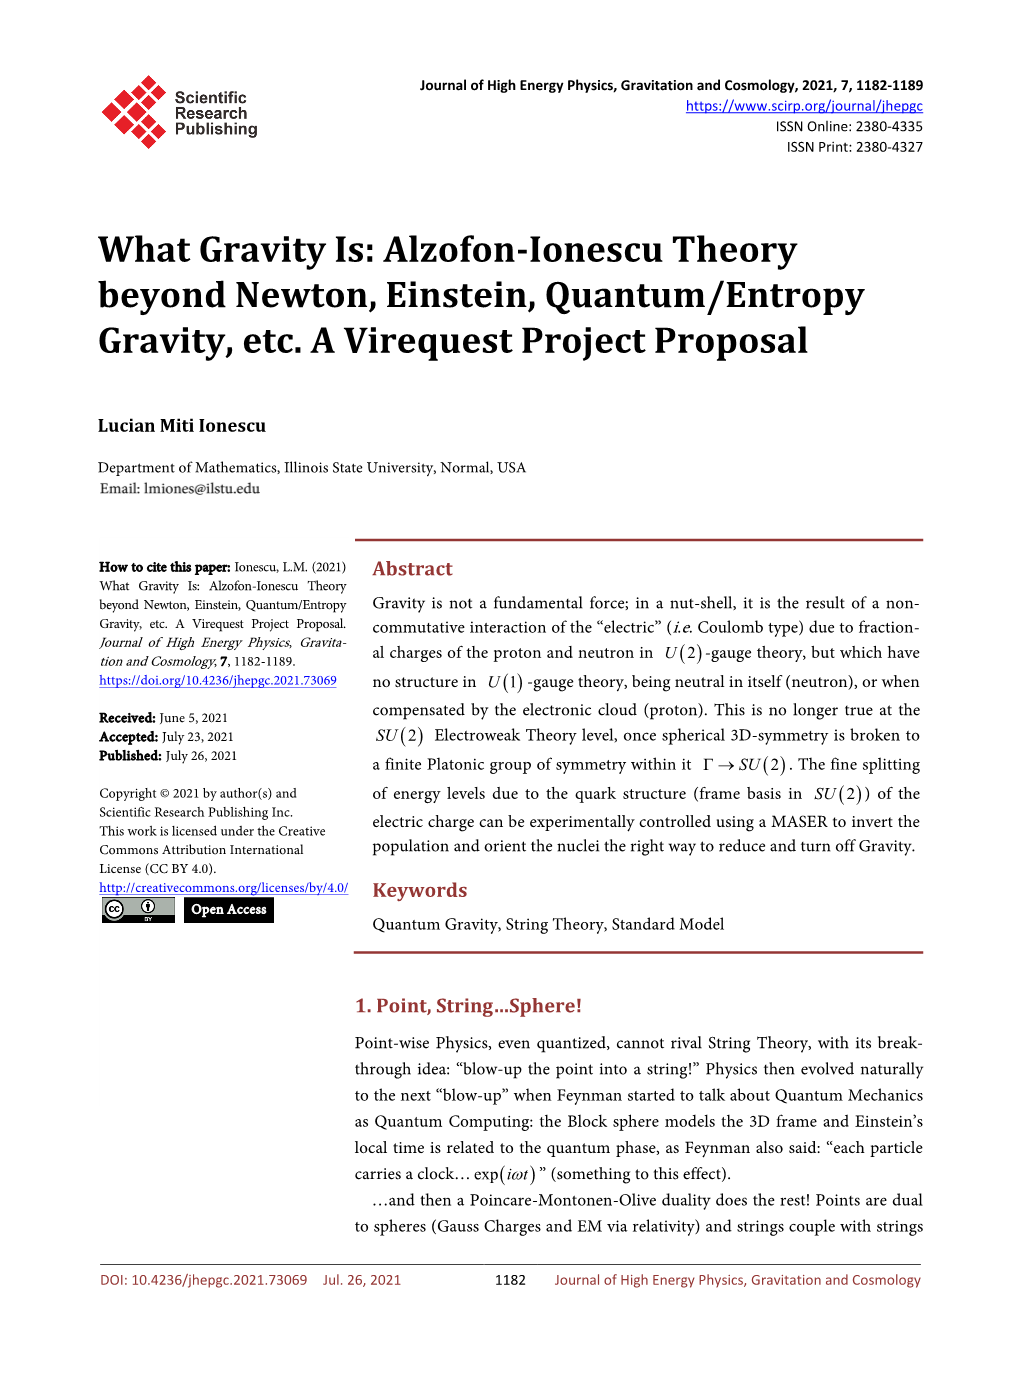 Alzofon-Ionescu Theory Beyond Newton, Einstein, Quantum/Entropy Gravity, Etc. a Virequest Project Proposal